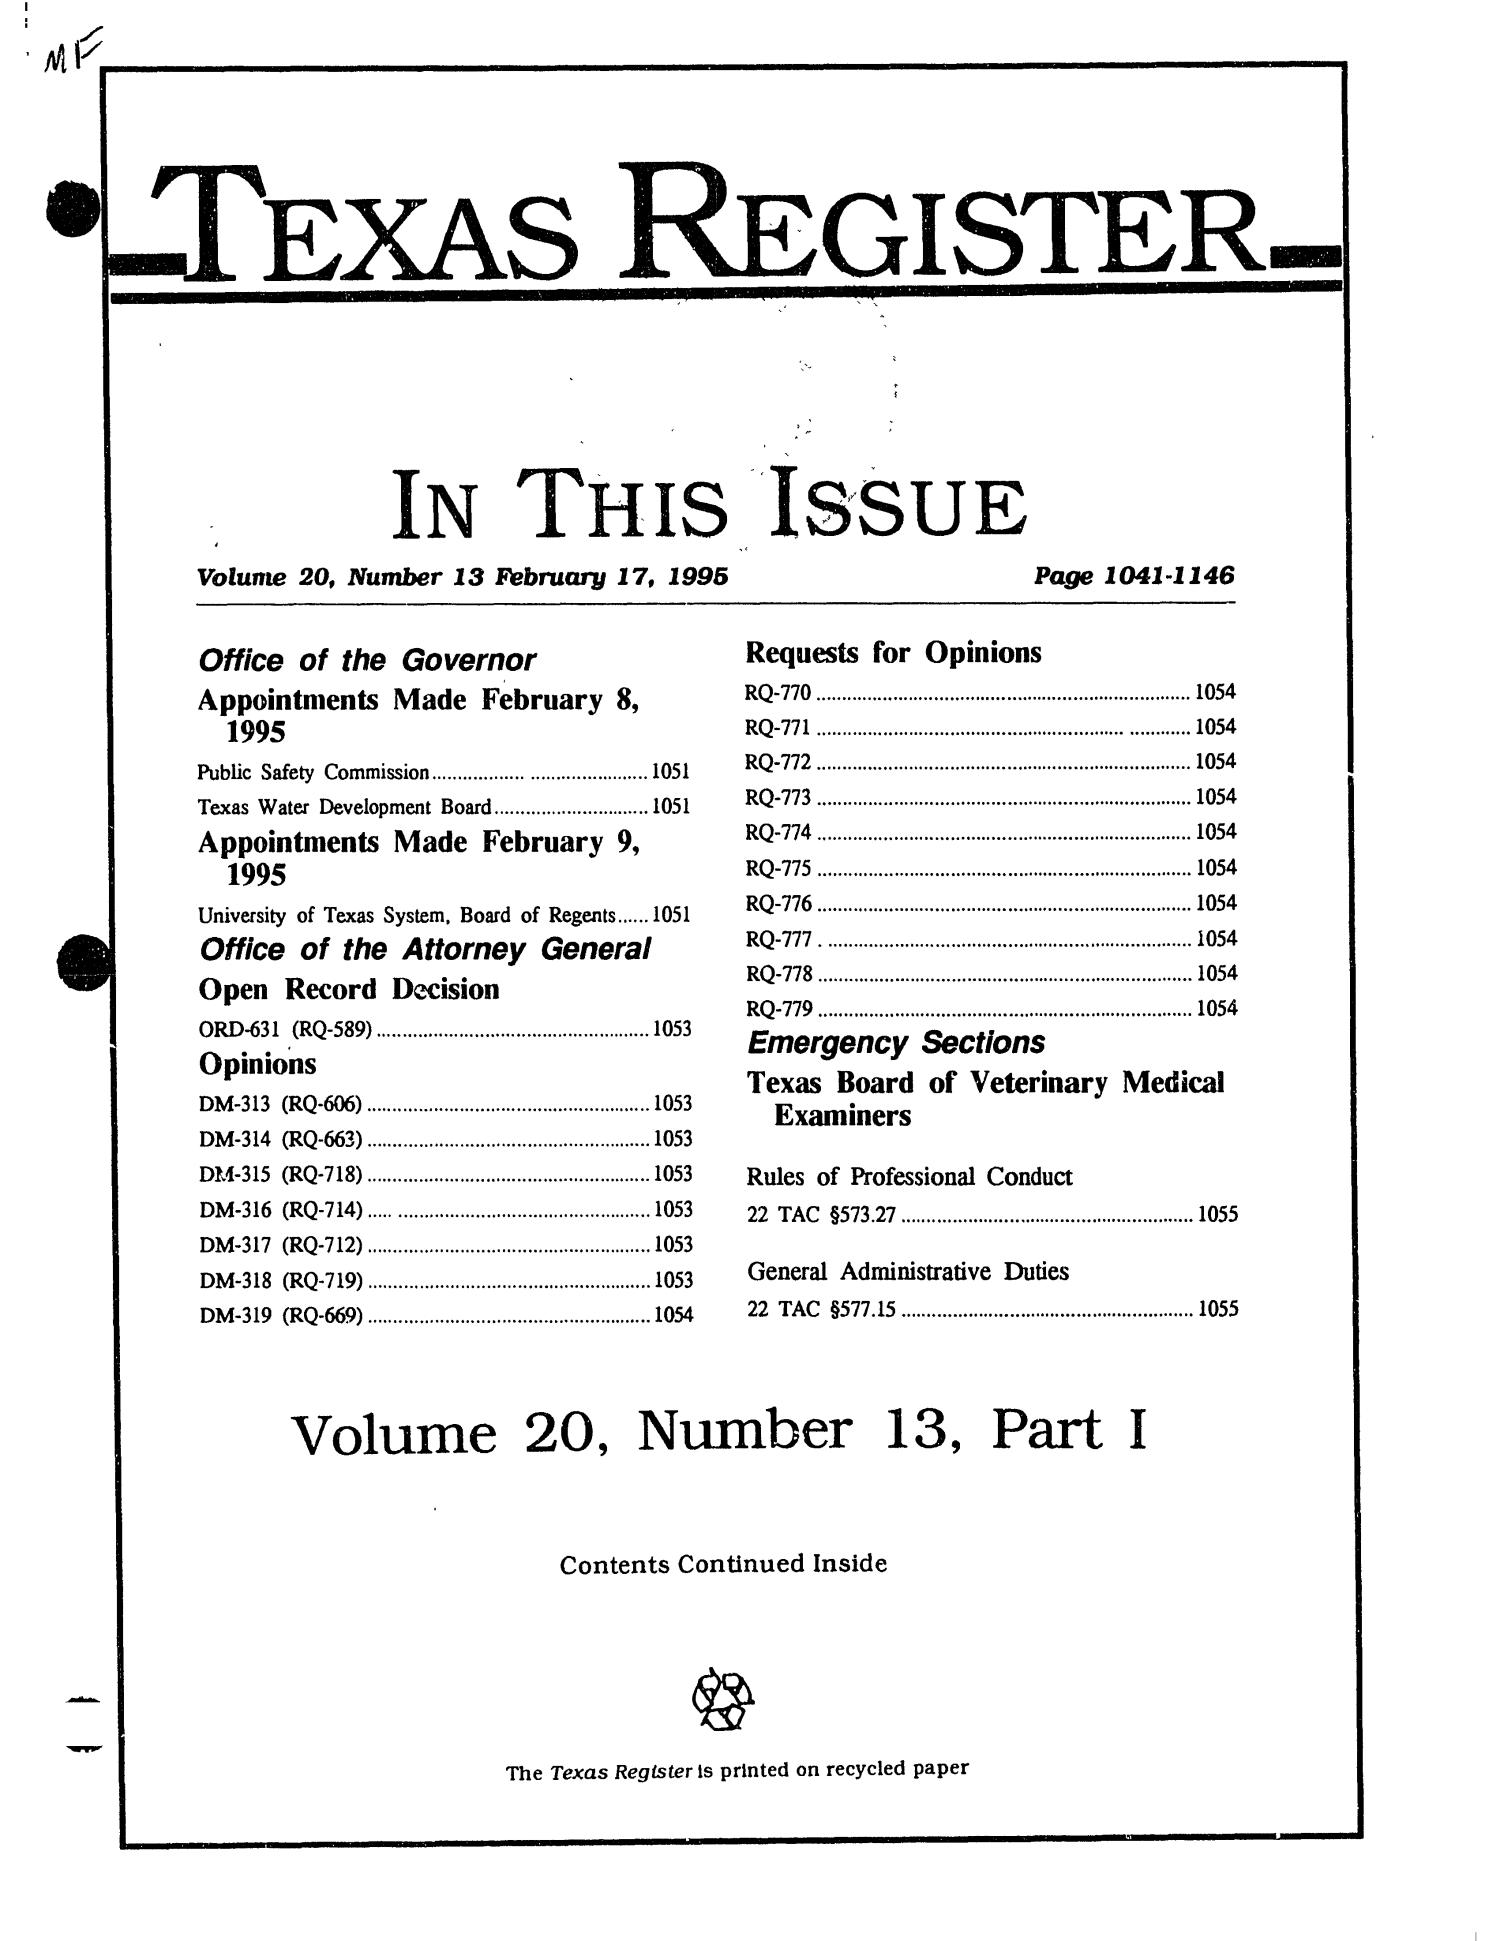 Texas Register, Volume 20, Number 13, Part I, Pages 1041-1146, February 17, 1995
                                                
                                                    Title Page
                                                